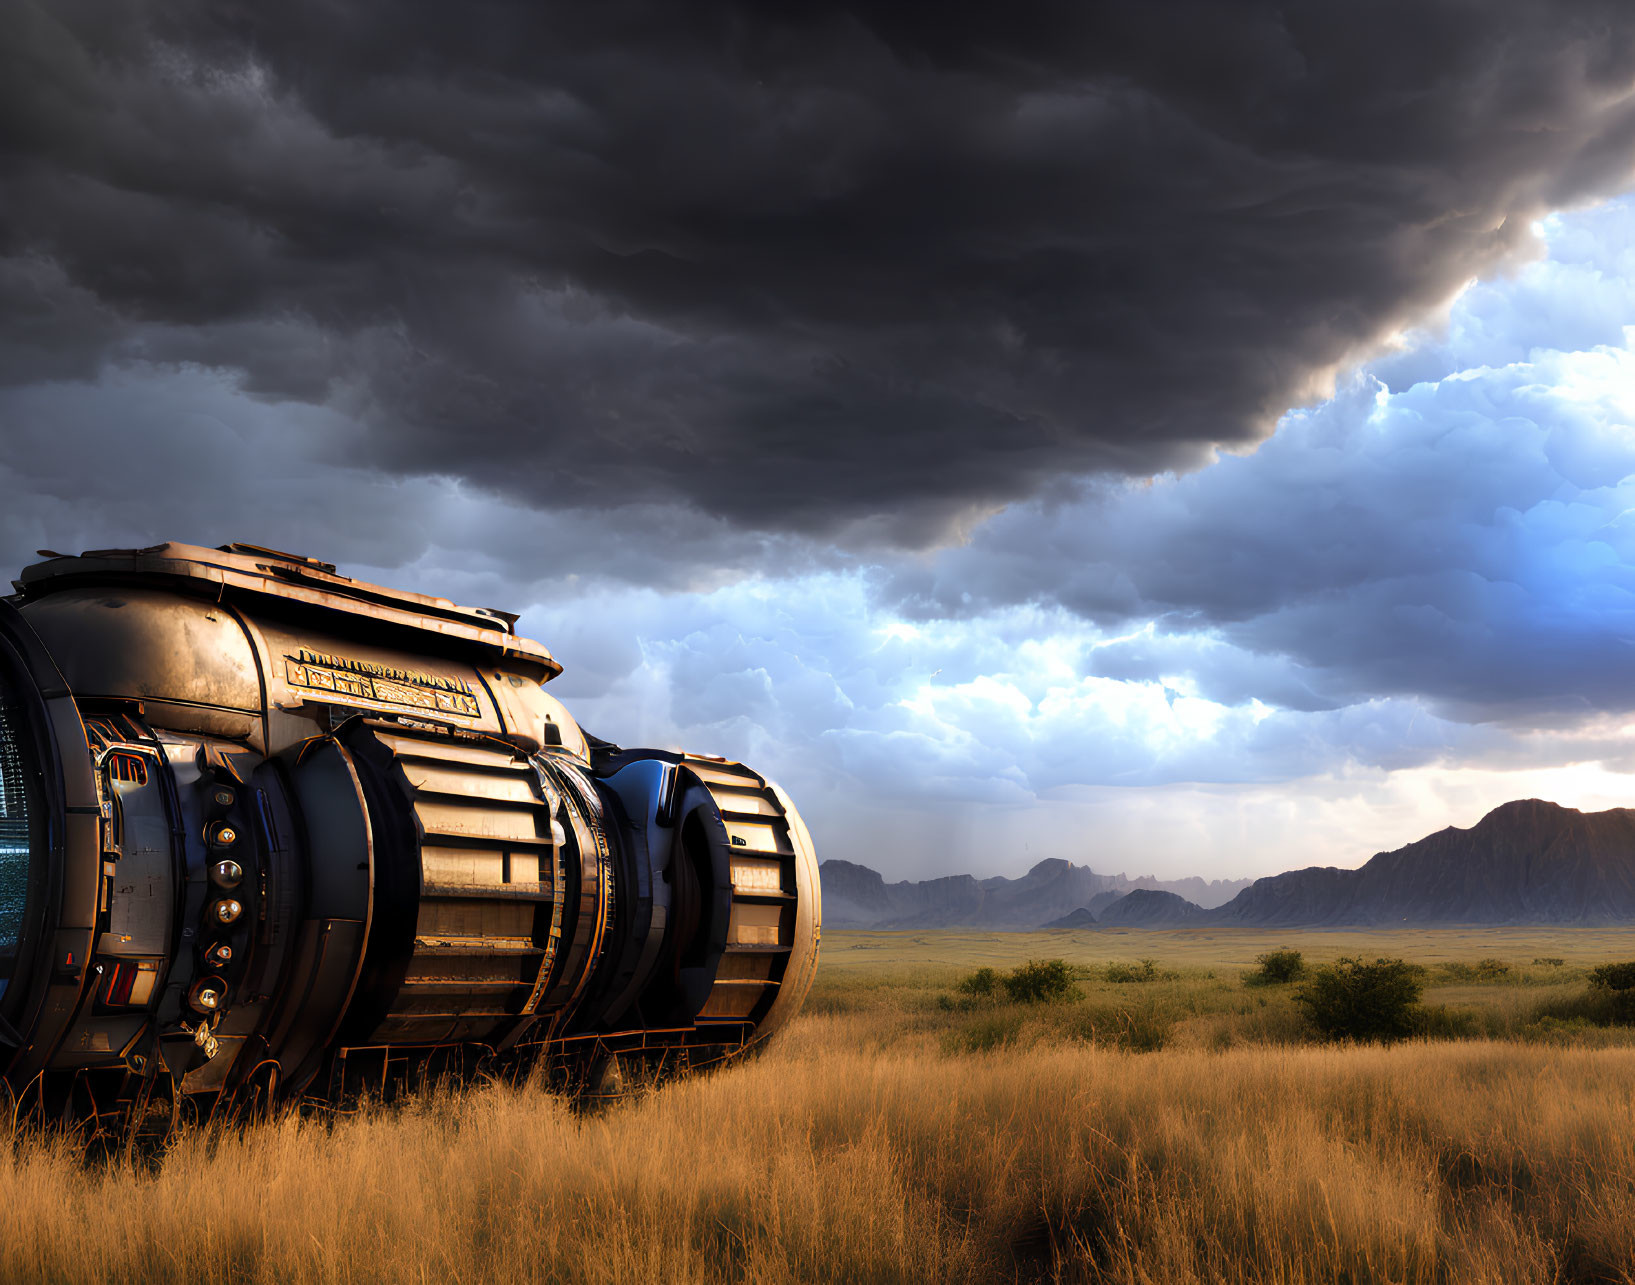 Futuristic train with cylindrical carriages under stormy sky on grassy plain